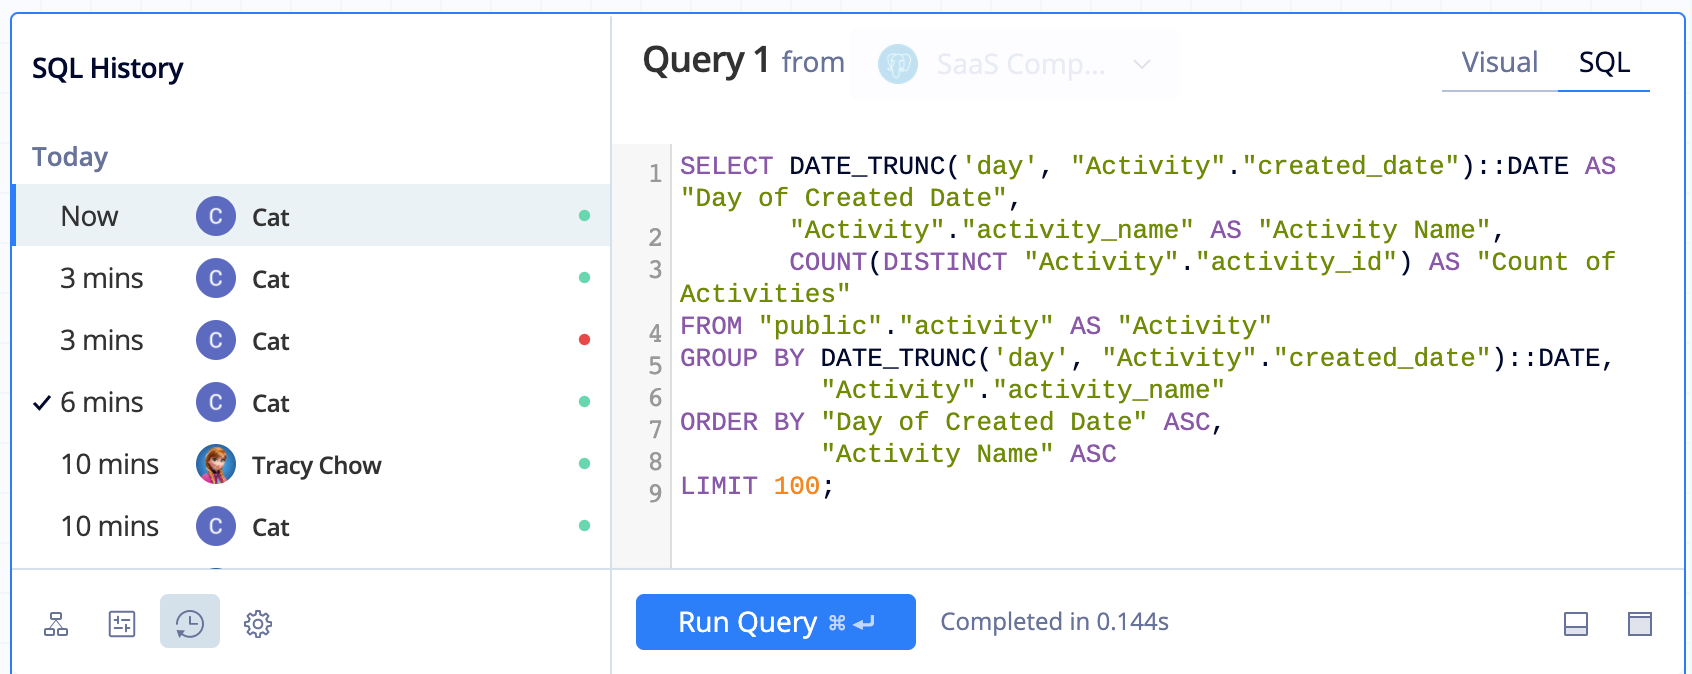 View drafts and executed query versions in the SQL History tab